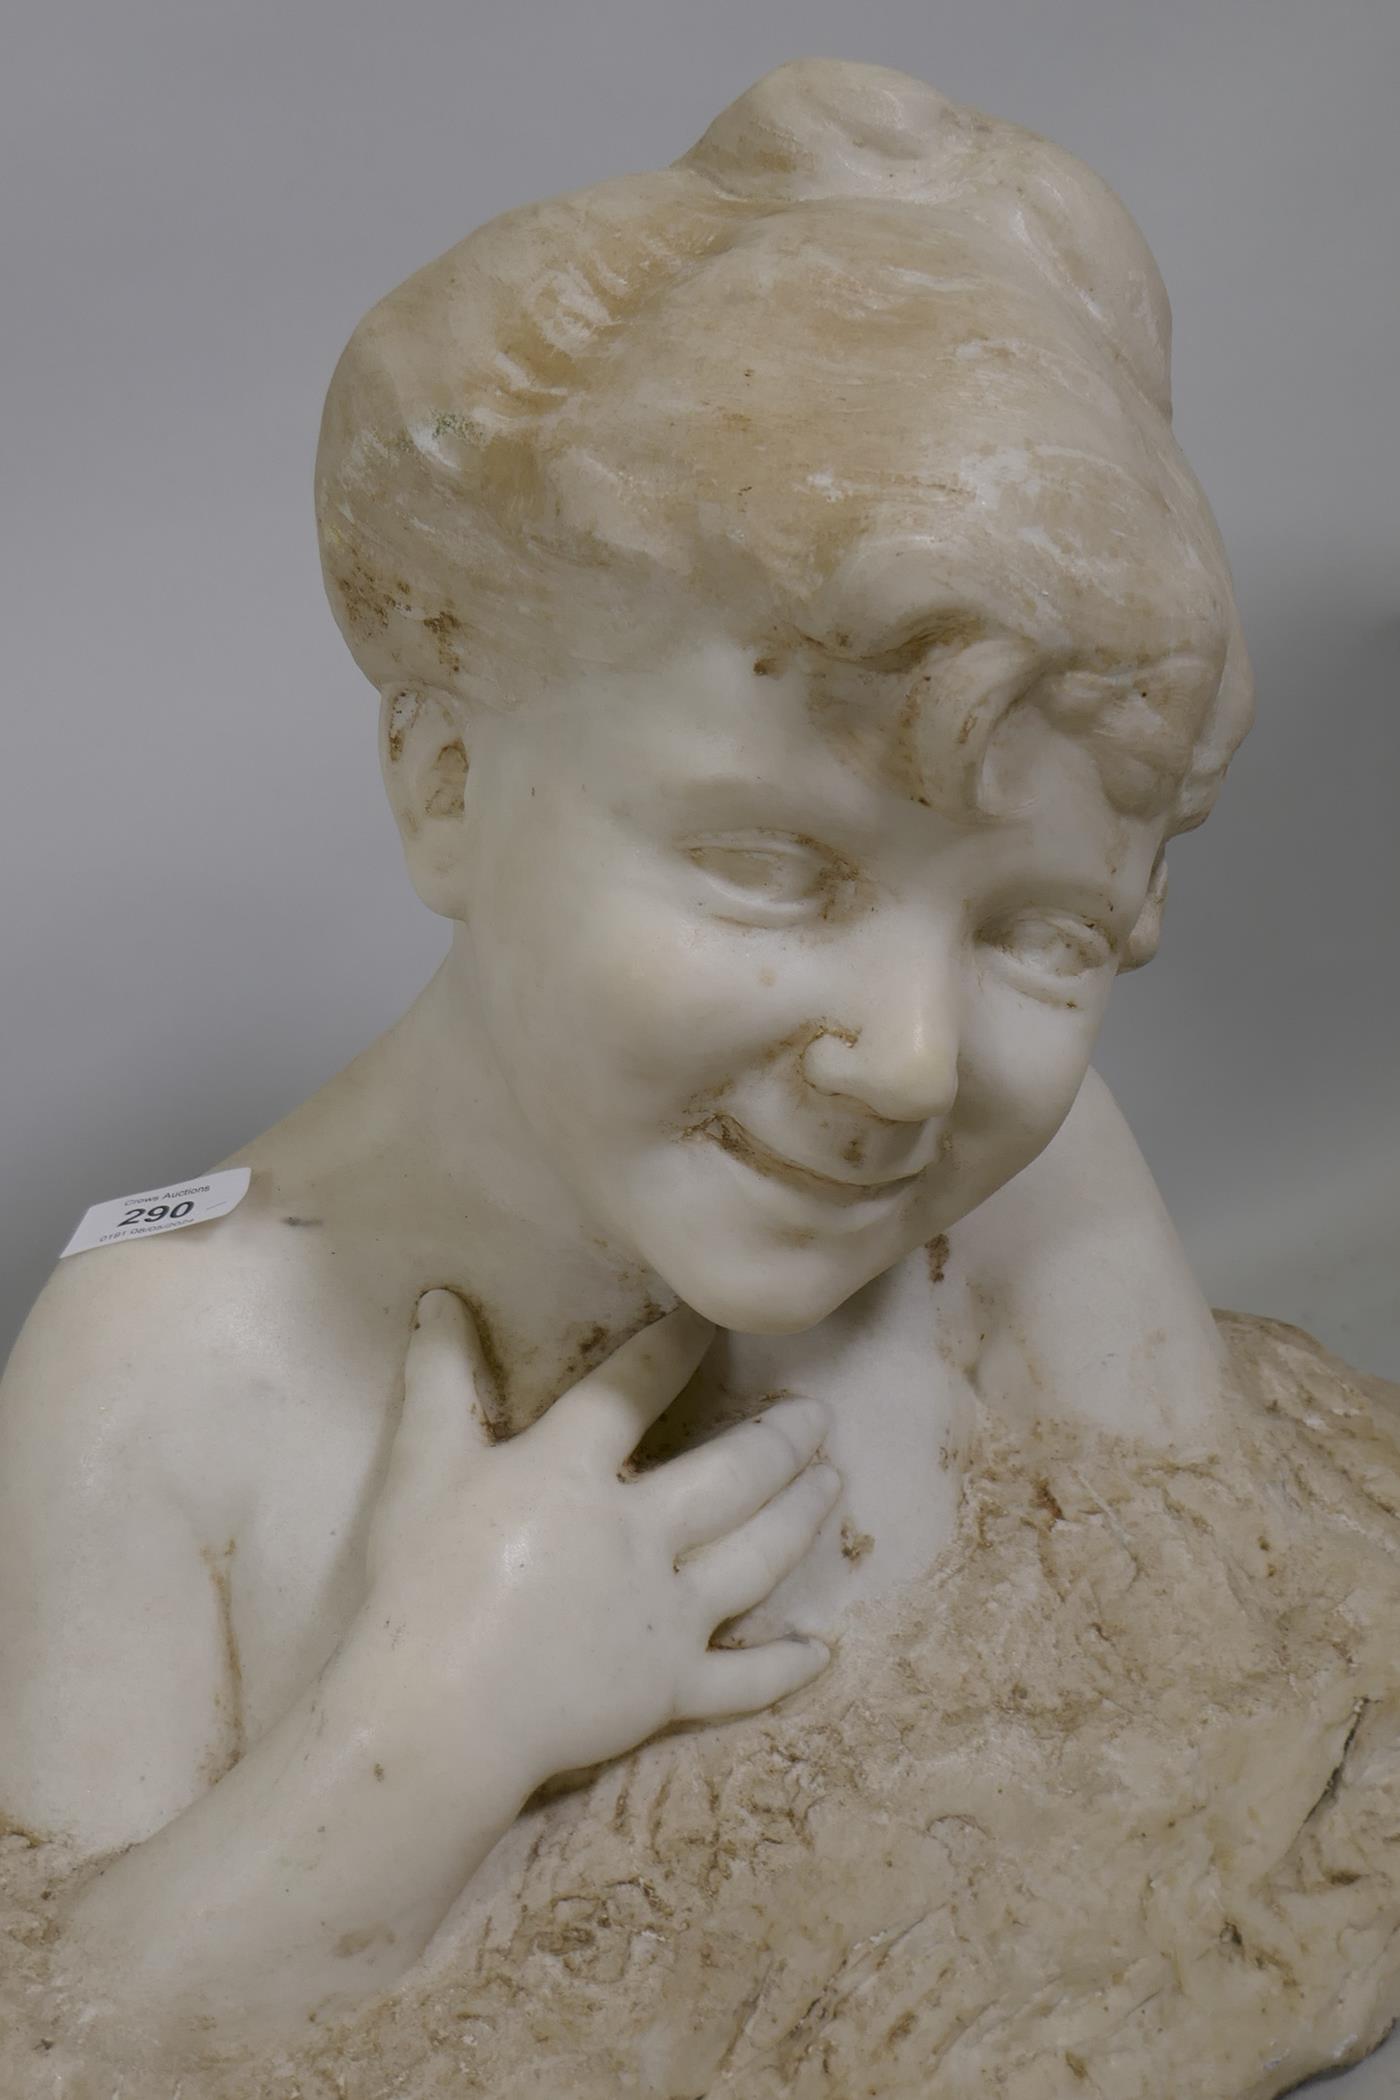 A C19th marble bust of a smiling child, signed indistinctly A. Holandoff?, 42cm high - Image 2 of 3